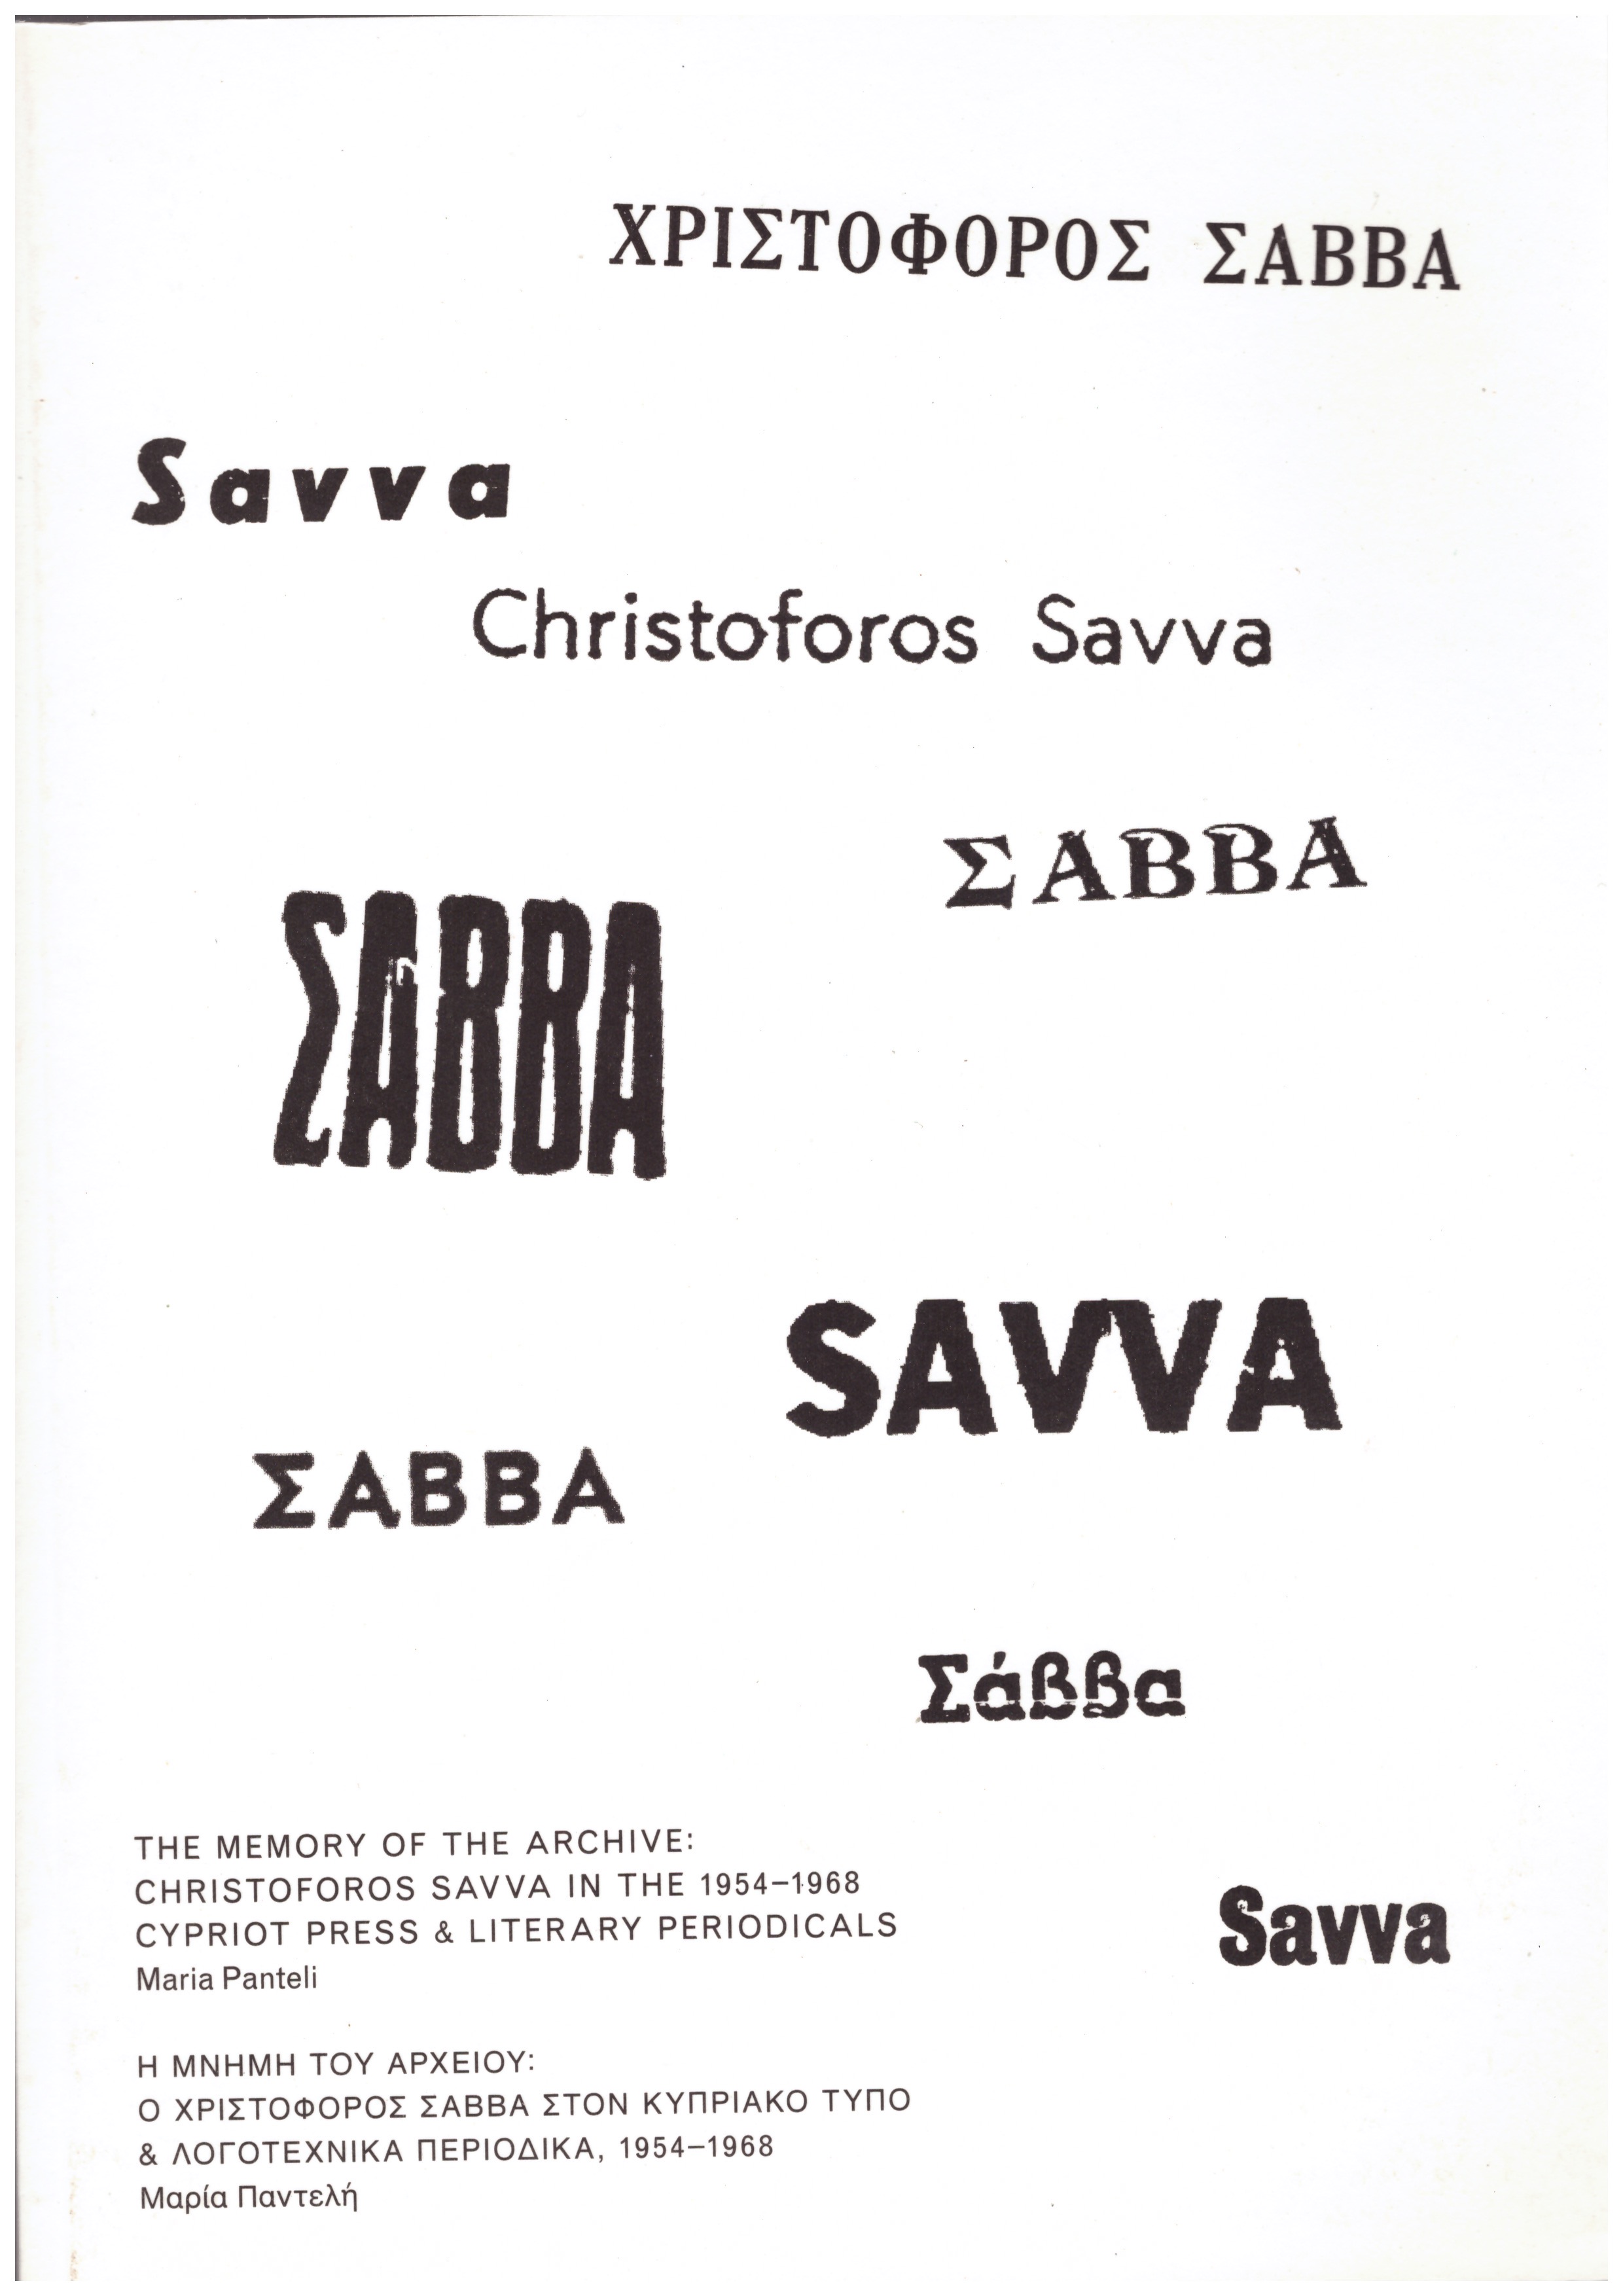 PANTELI, Maria (ed.) - The Memory of the Archive: Christoforos Savva in the 1954 – 1968 Cypriot Press & Literary Periodicals